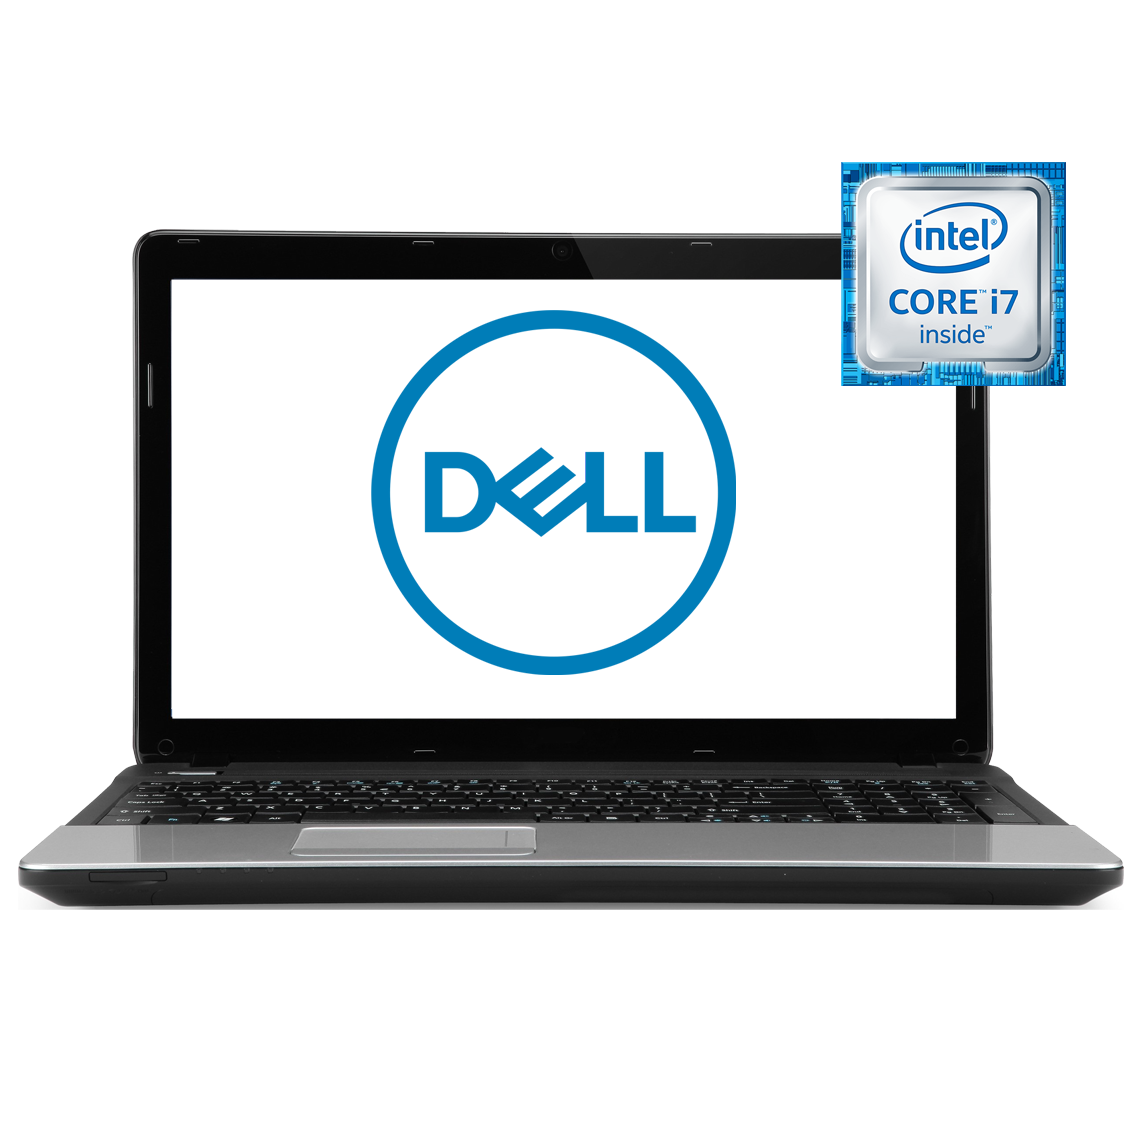 Sell My Dell Laptop, Trade In & Recycle Old Dell Laptop Online | Mazuma